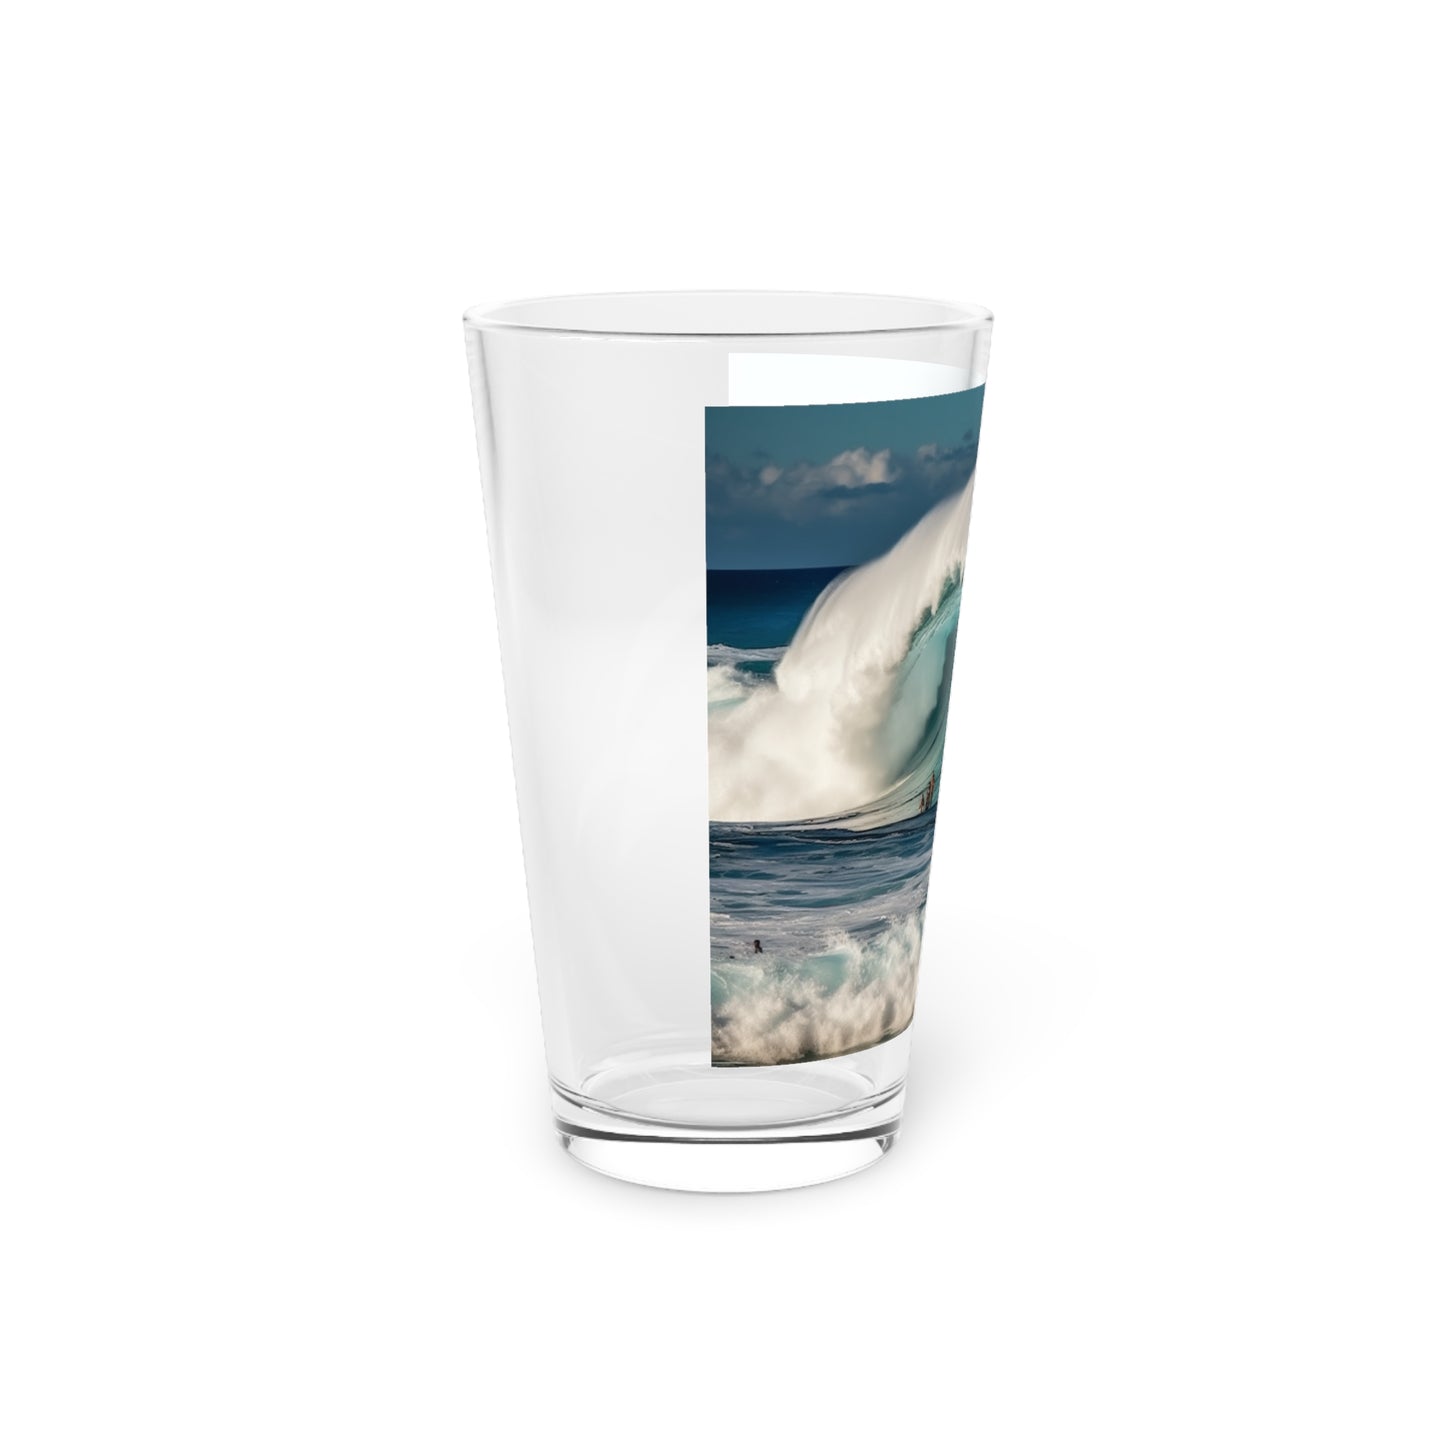 Dive into the waves of Pipeline: North Shore, Oahu, Hawaii, US with this Pint Glass. Surfing's soul in a glass, exclusively at Stashbox.ai.